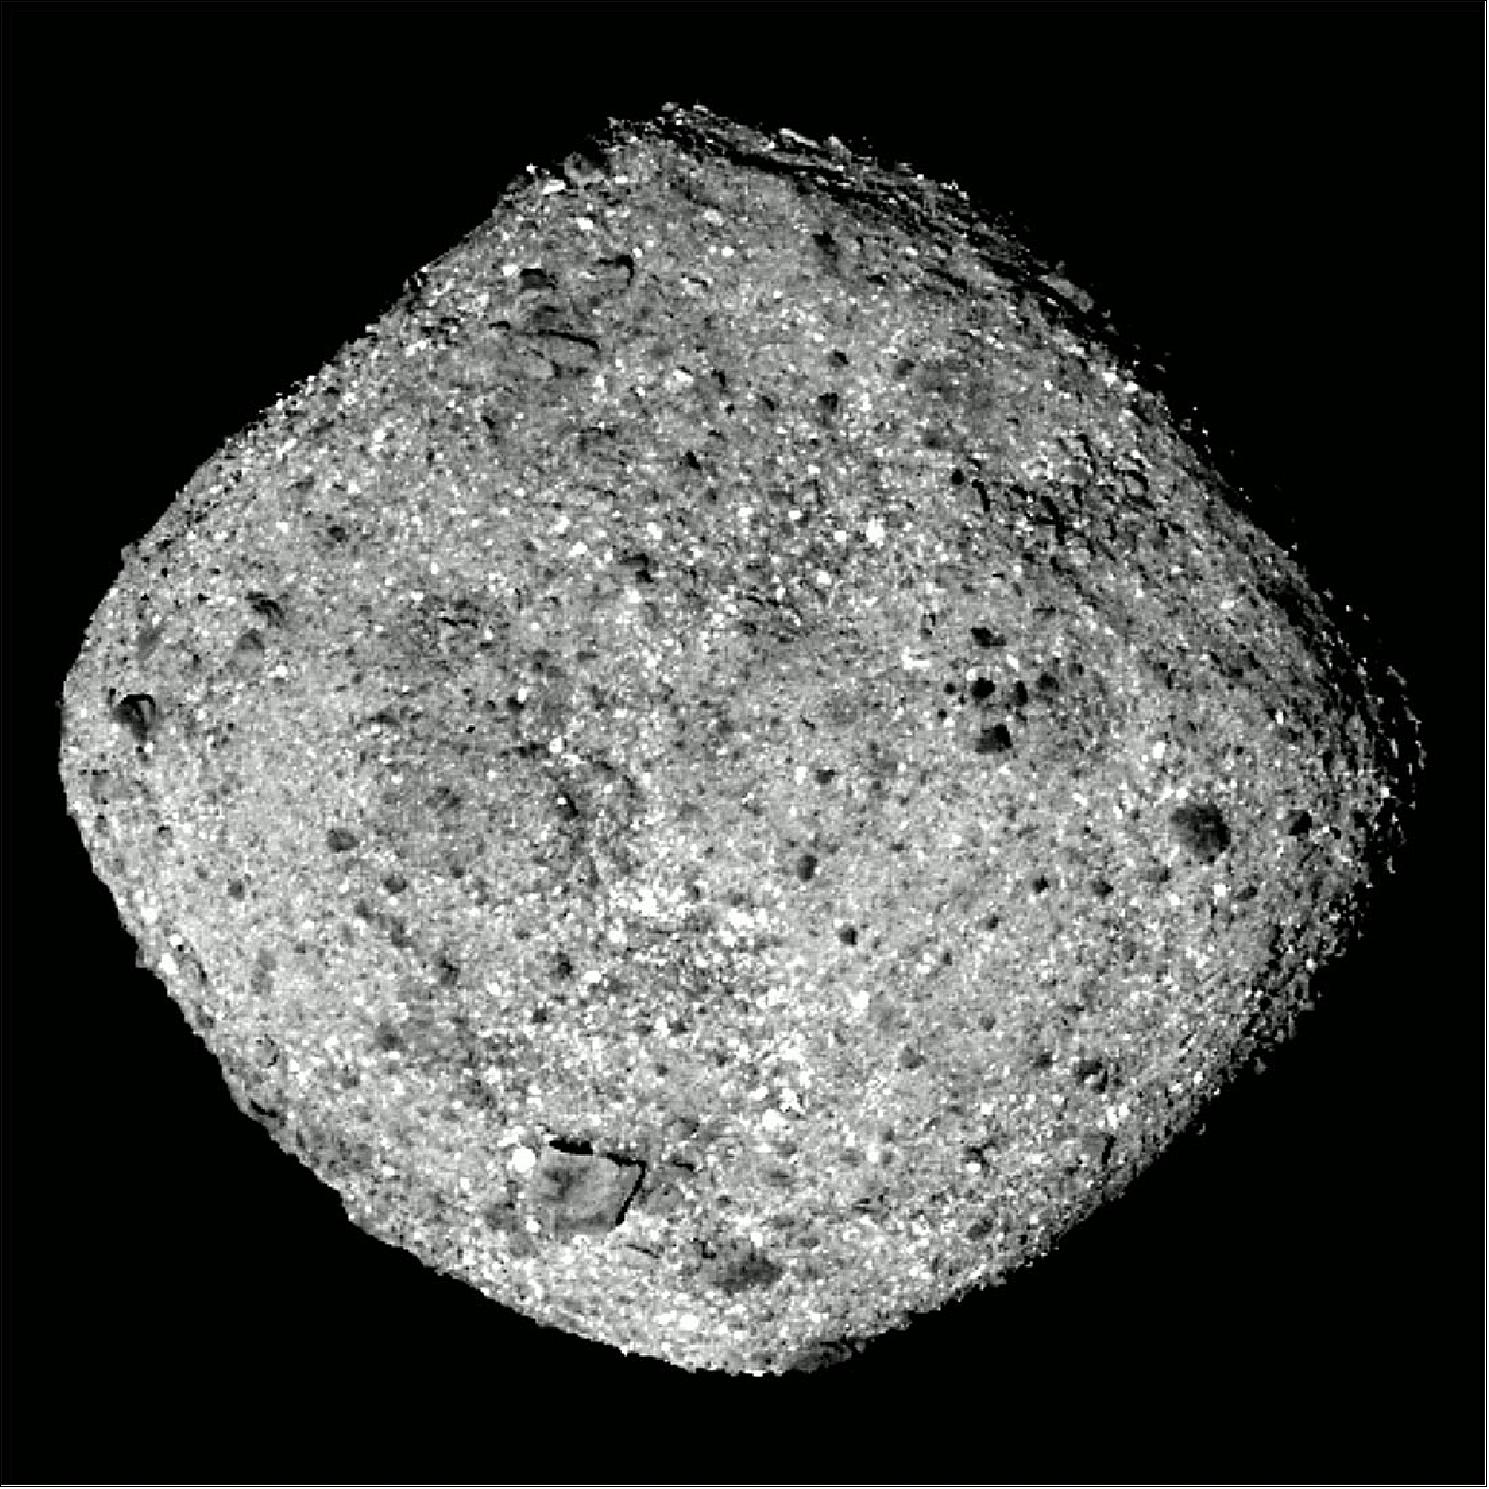 Figure 64: This image of Bennu was taken by the OSIRIS-REx spacecraft from a distance of around 80 km (image credits: NASA/Goddard/University of Arizona)